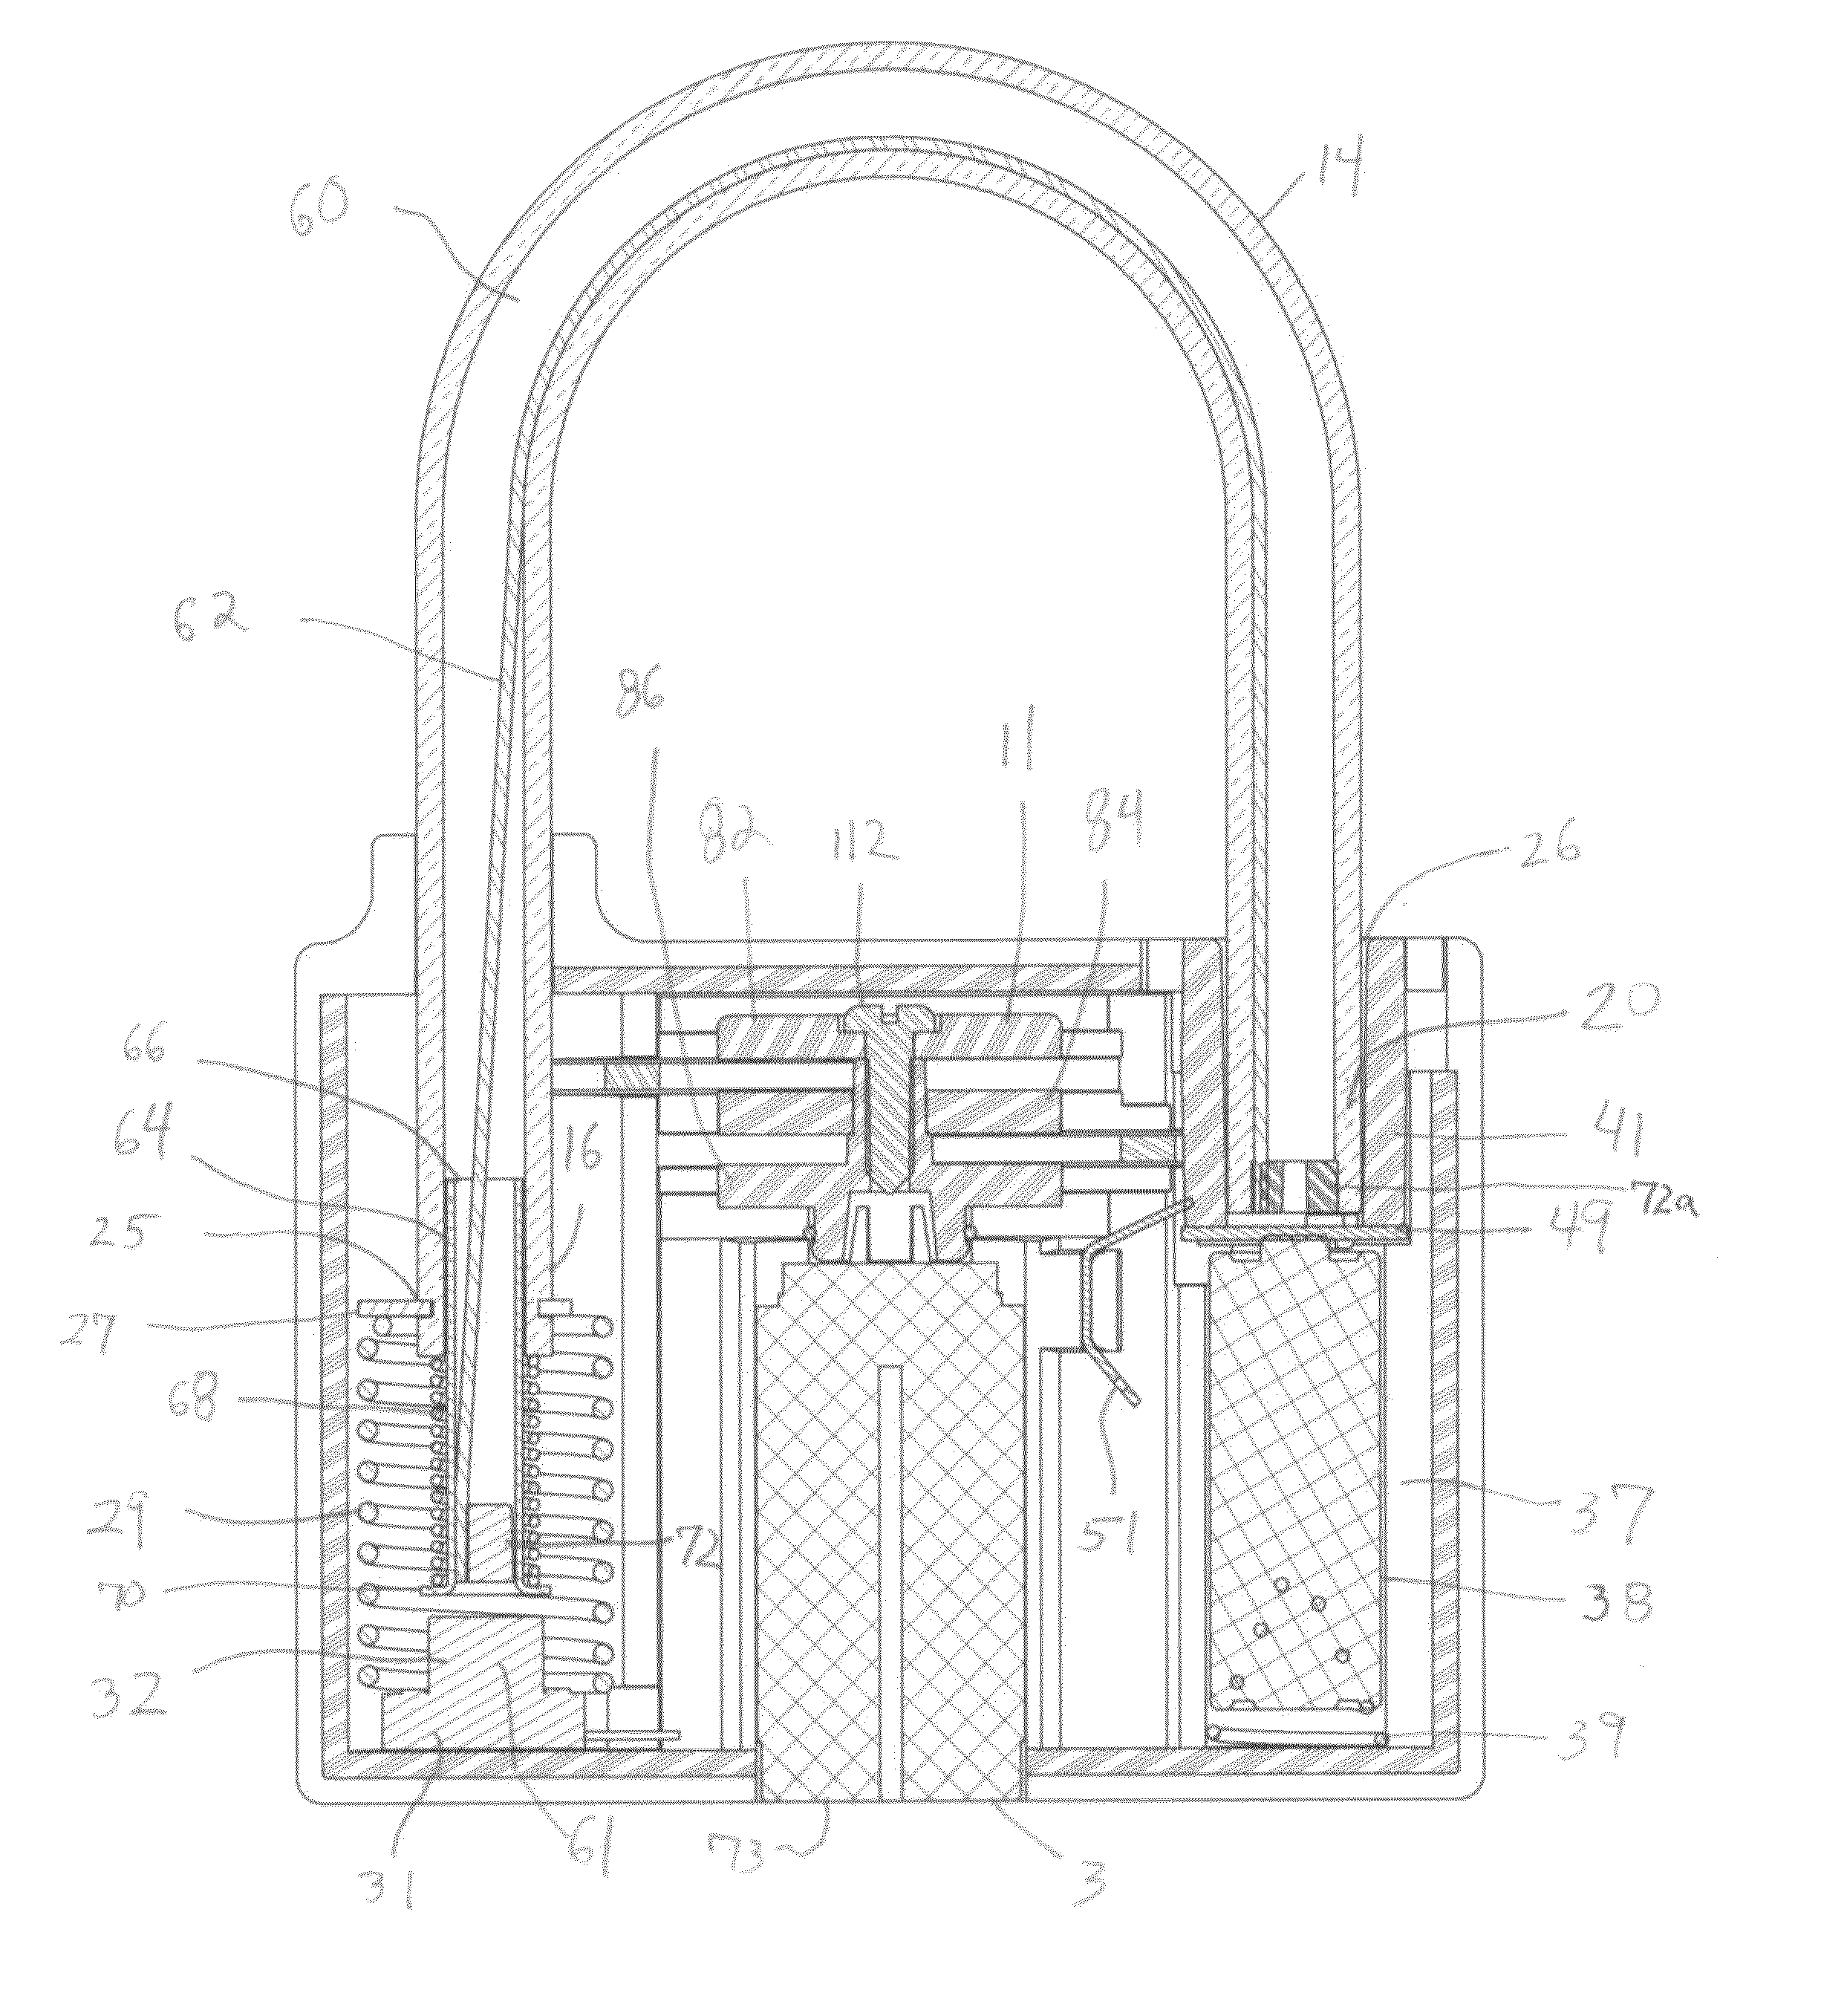 Padlock with alarm and shackle locking mechanism